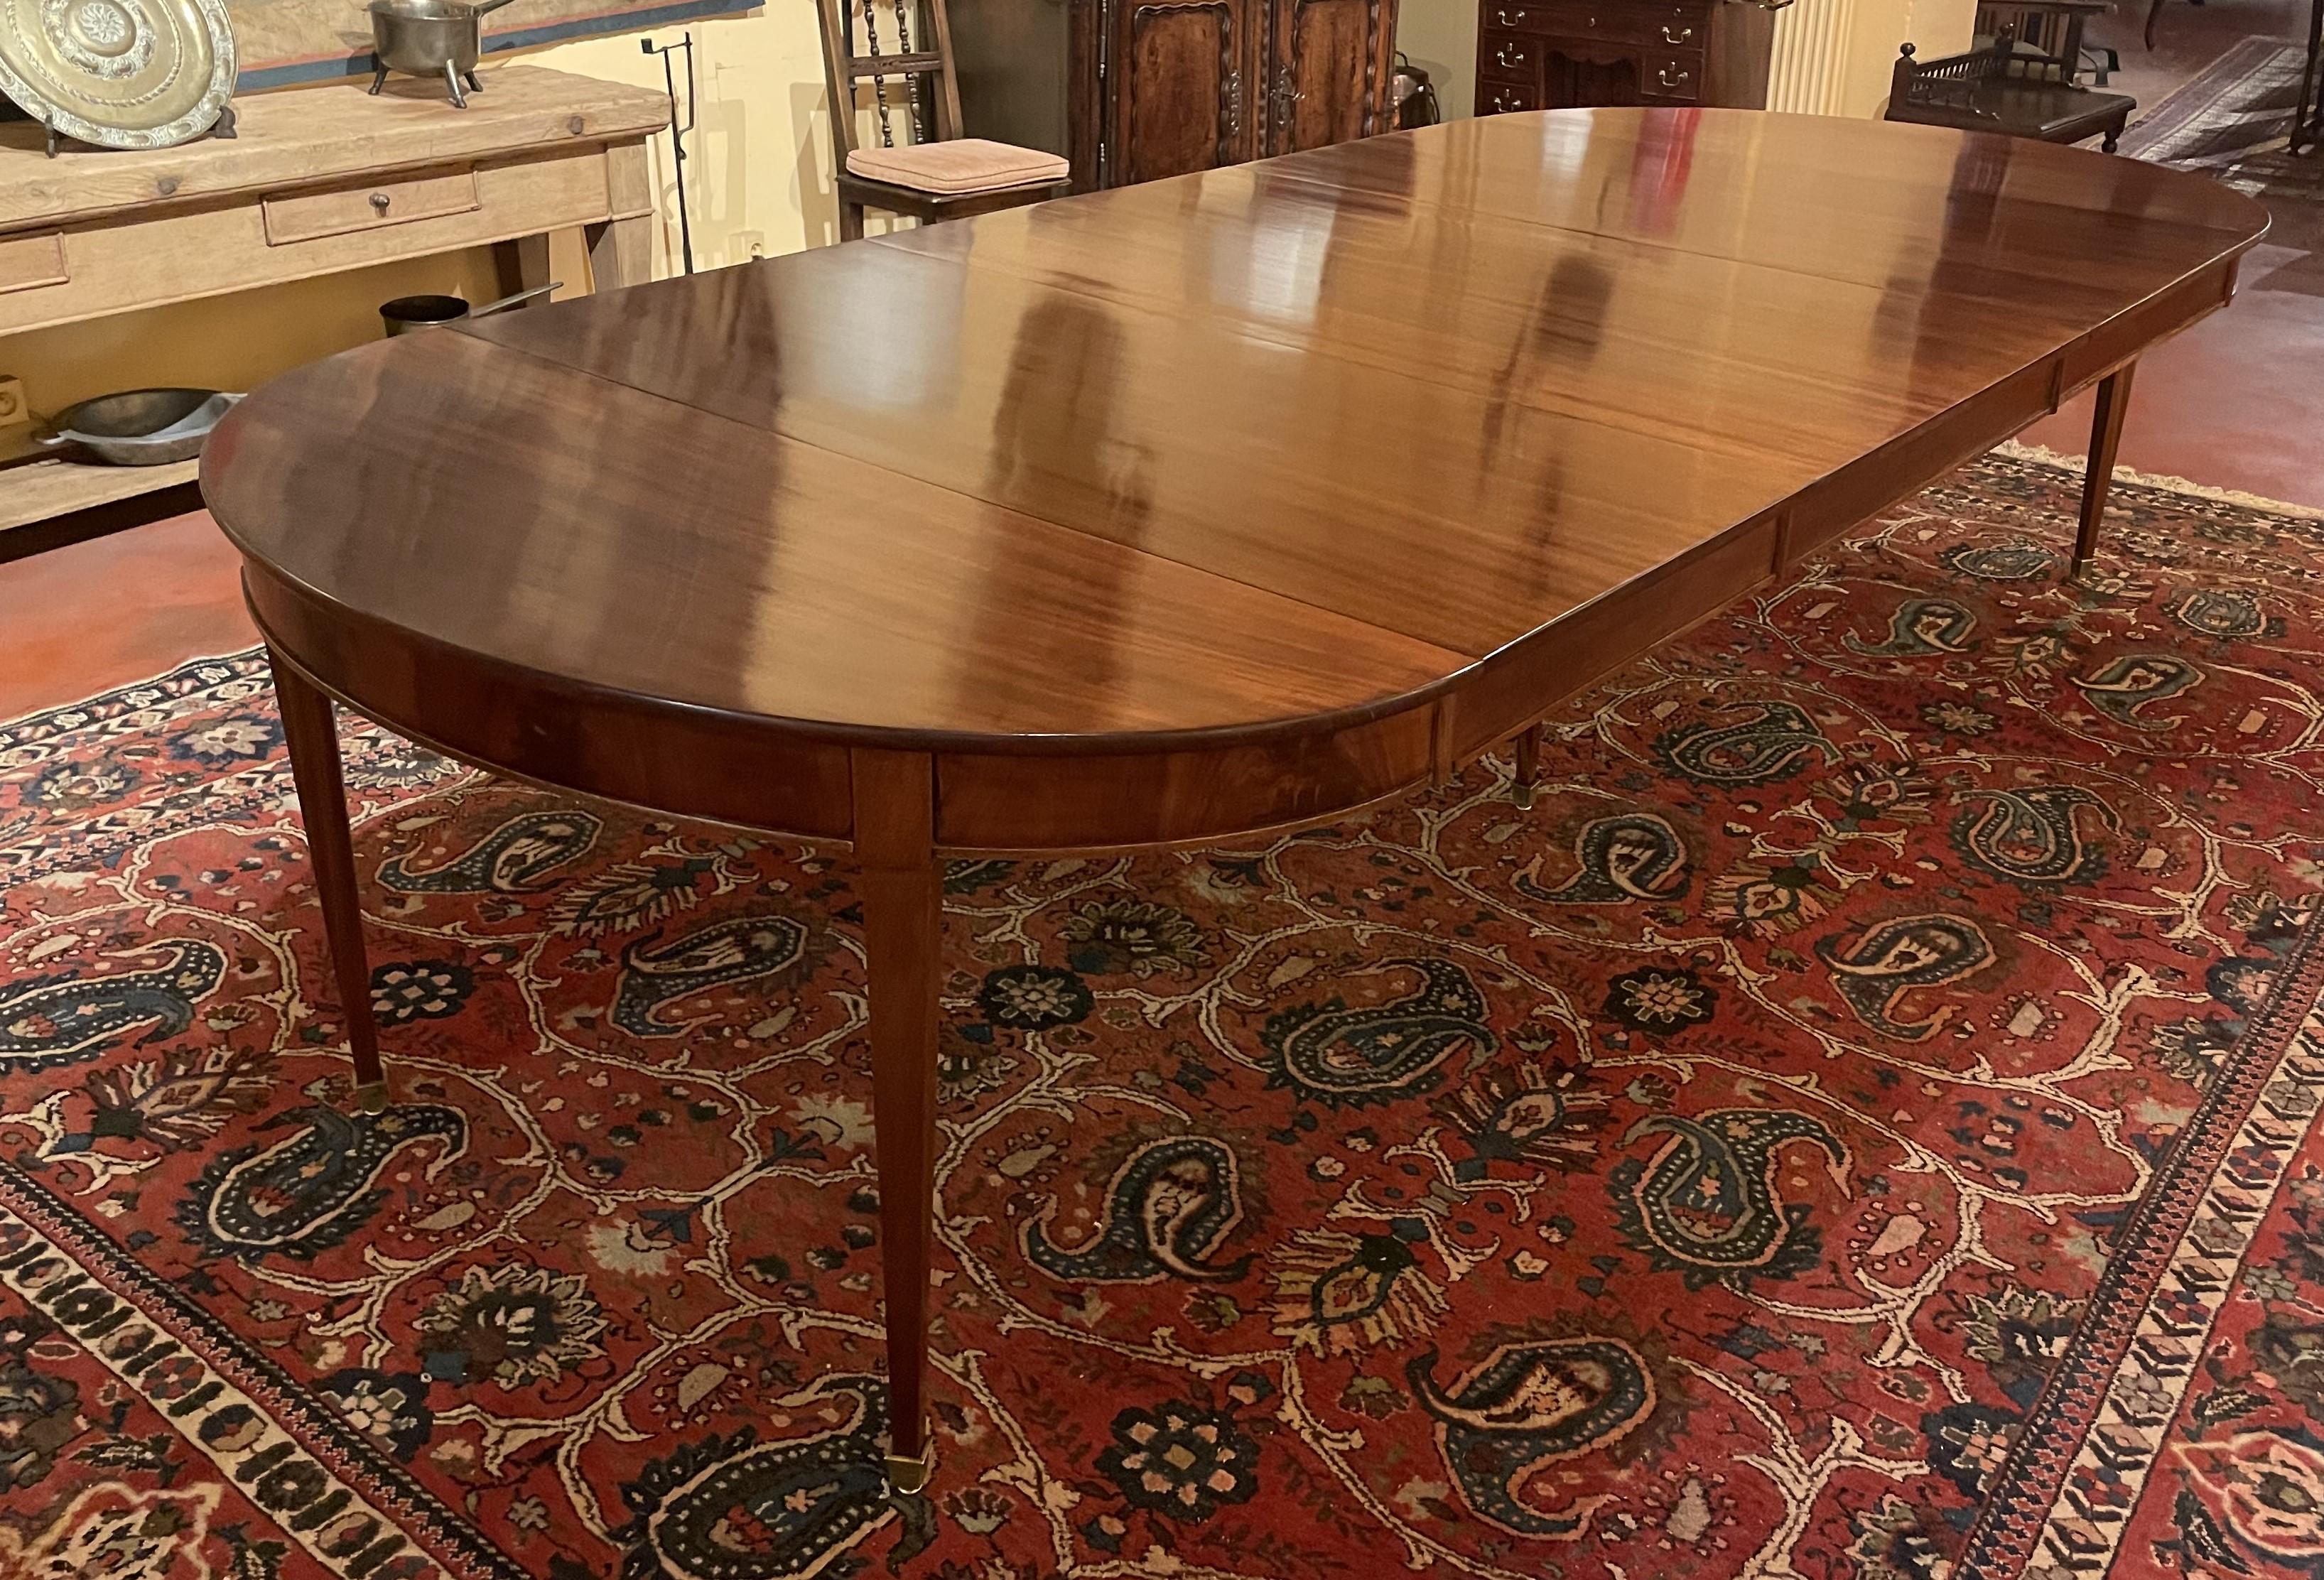 rare 6-legged mahogany dining room table from the Louis XVI period -18th  century with a headband

The table rests on 6 straight legs ending with bronze sabots
Very beautiful table which is made up of 3 solid mahogany extensions in the same wood and